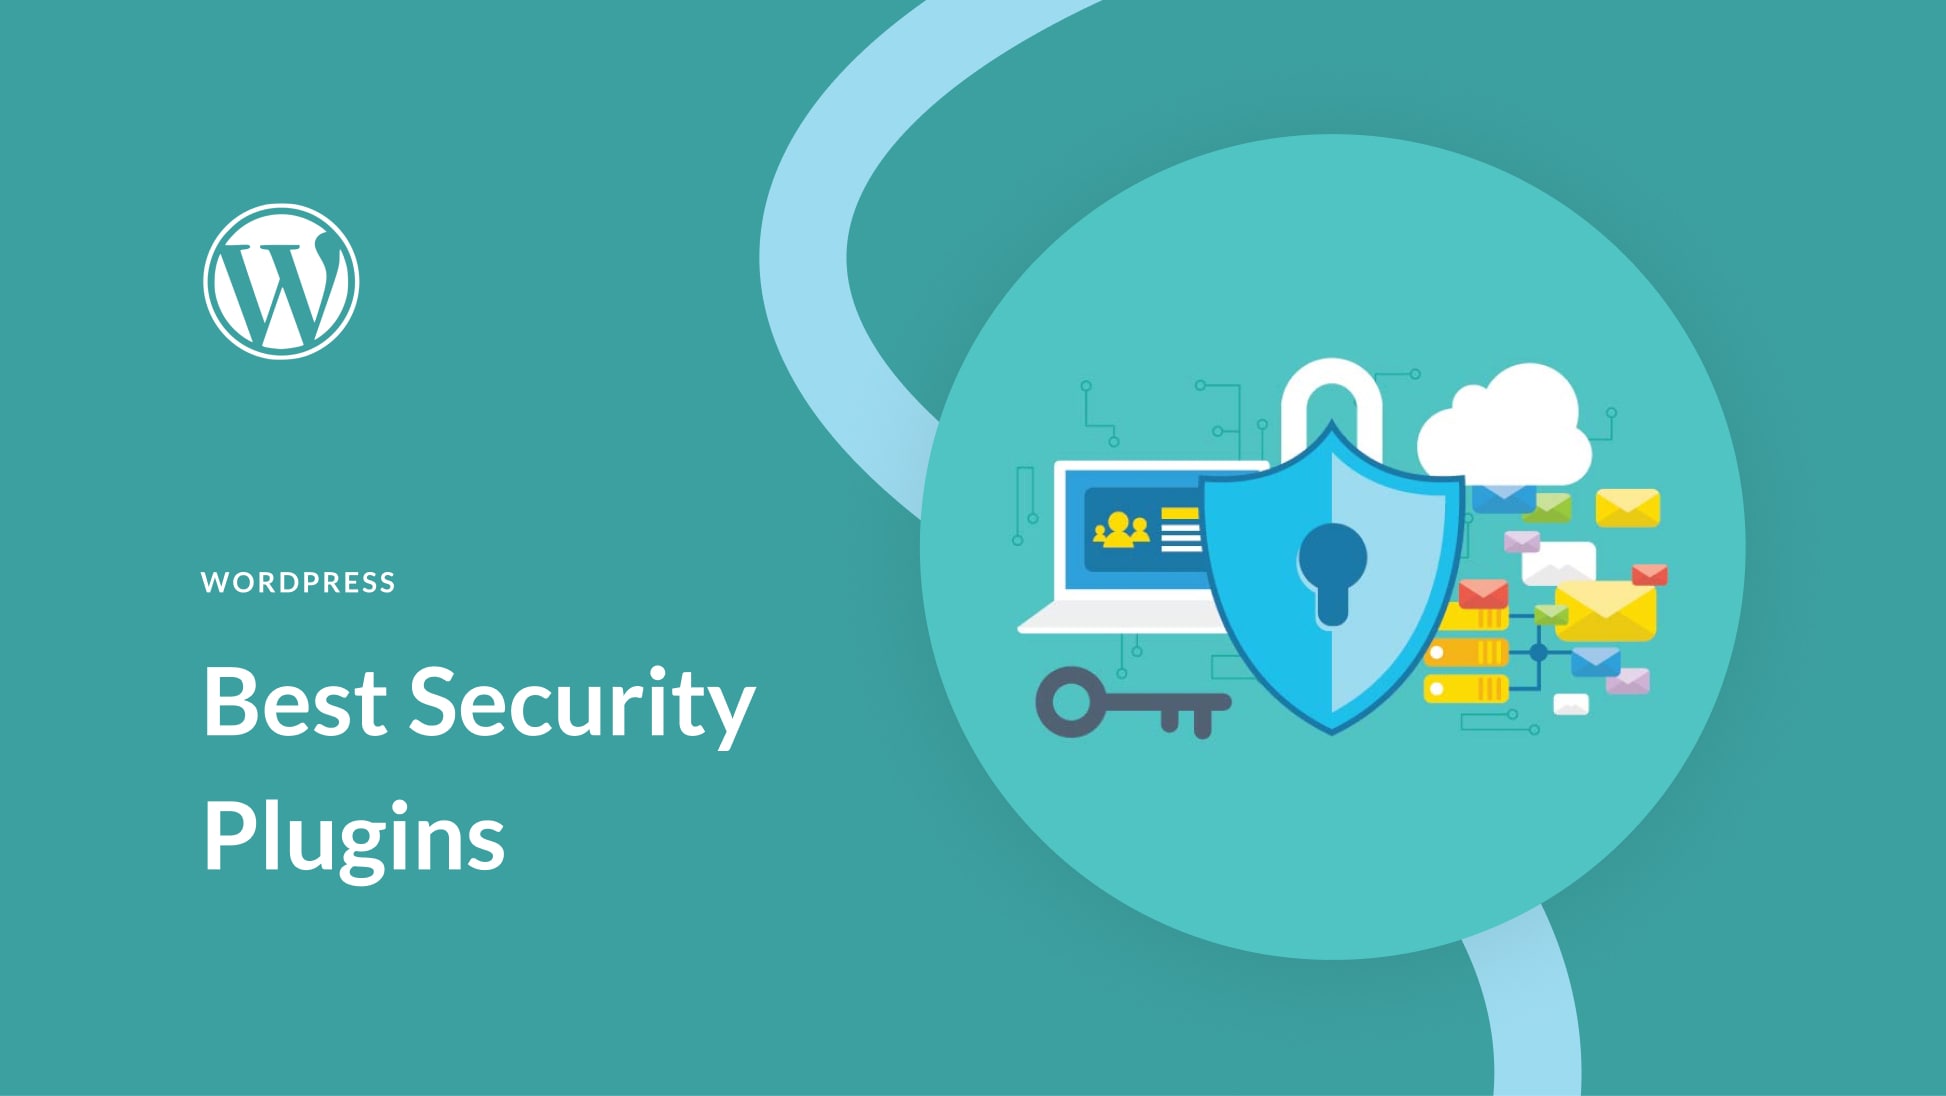 WordPress Security: How to Keep Your Website Safe